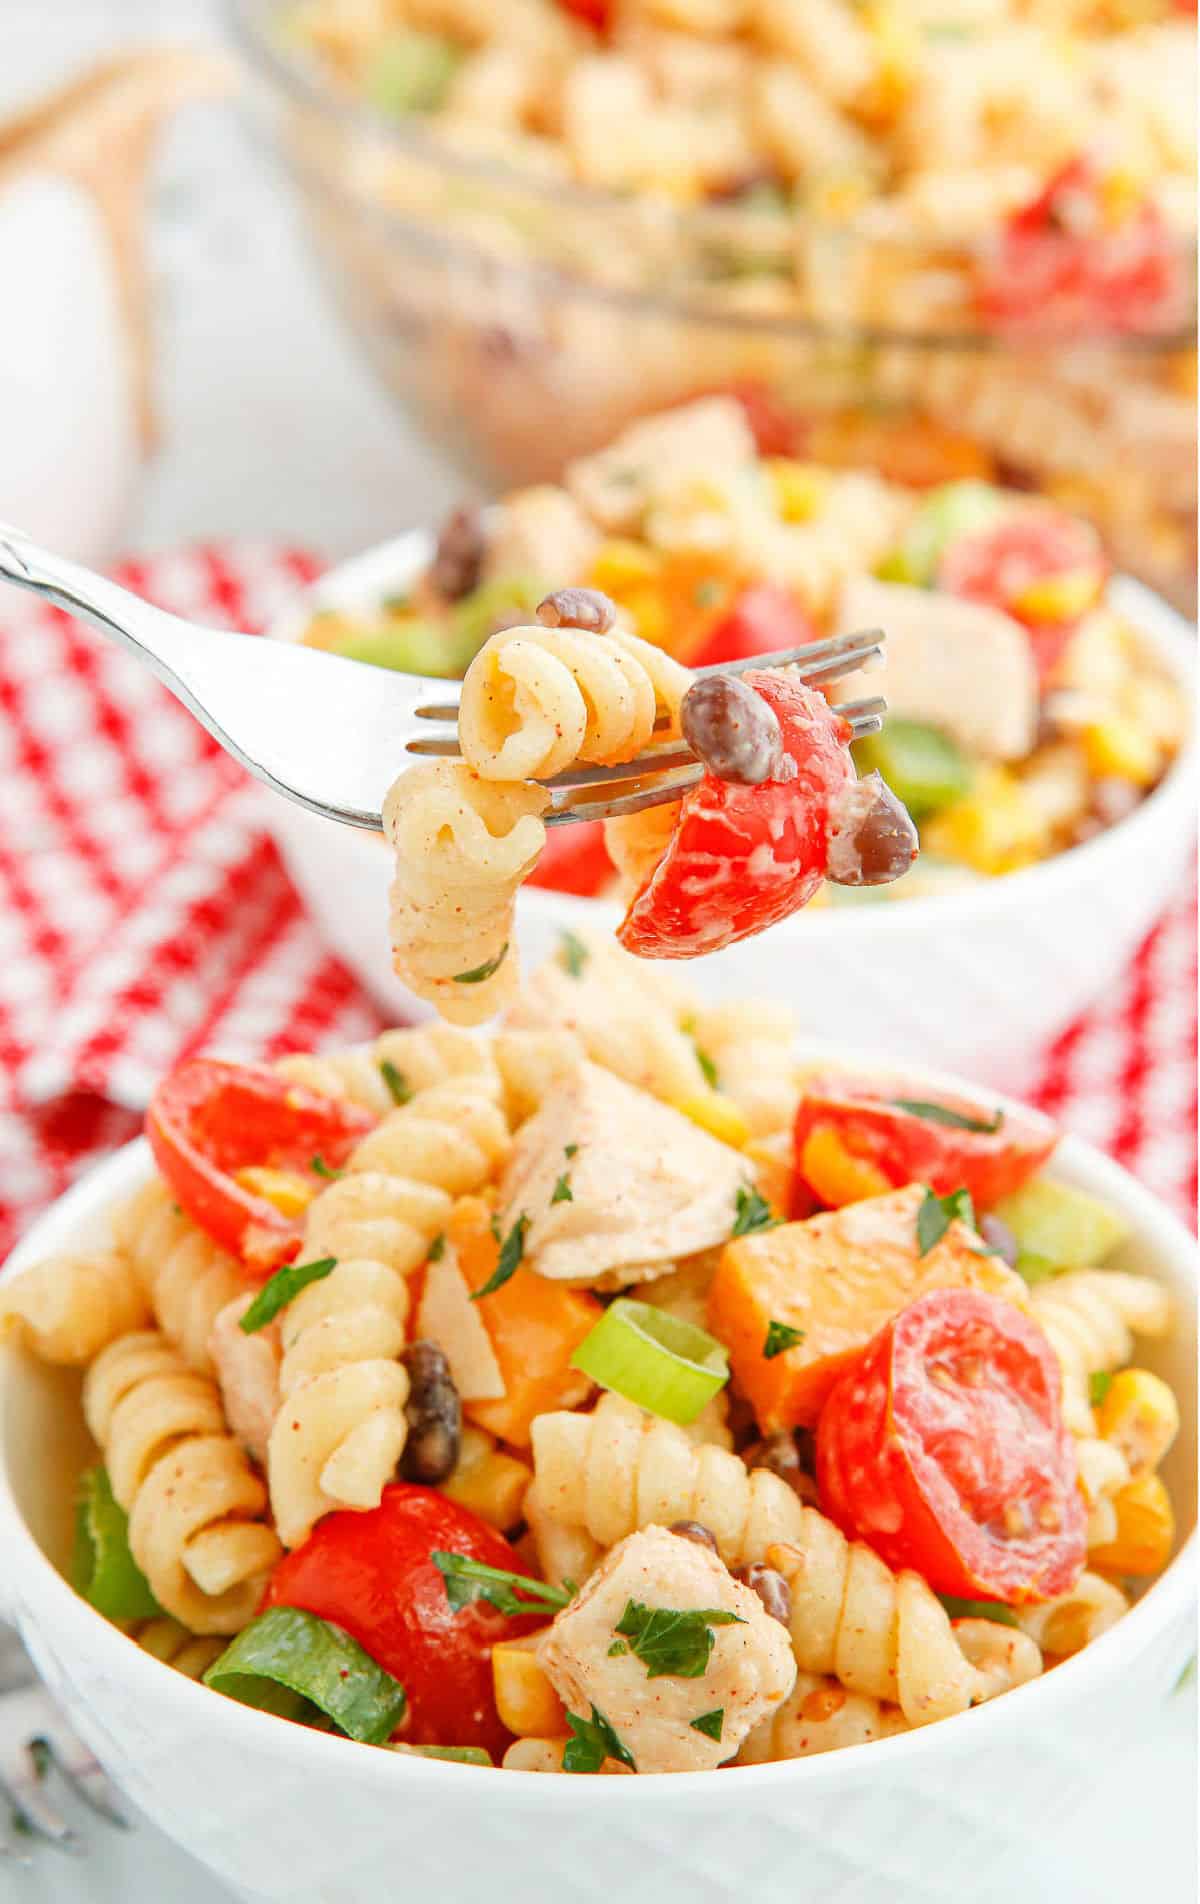 A serving of pasta salad in a bowl with a fork.